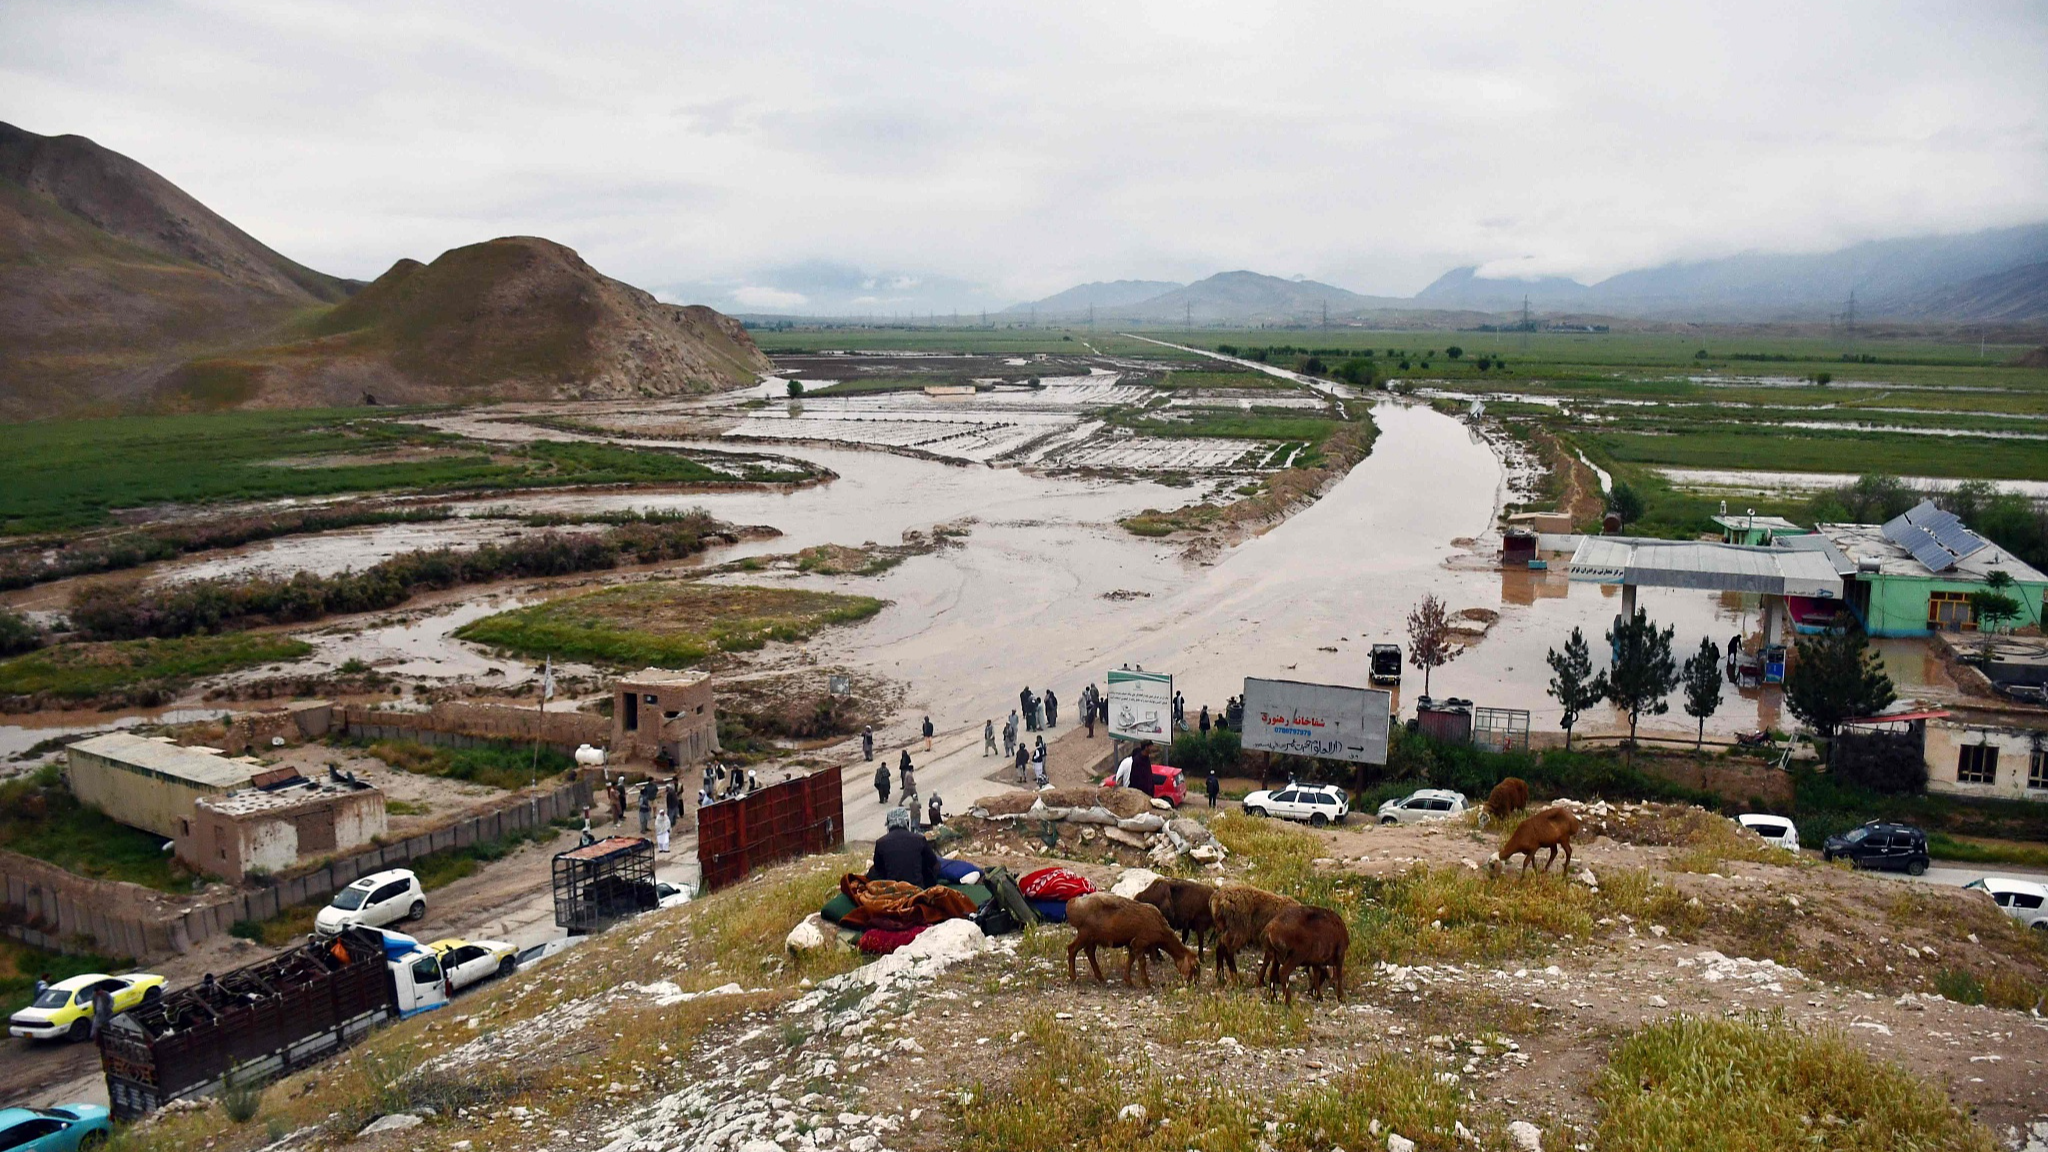 Flash floods kill over 300 people in northern Afghanistan, UN says